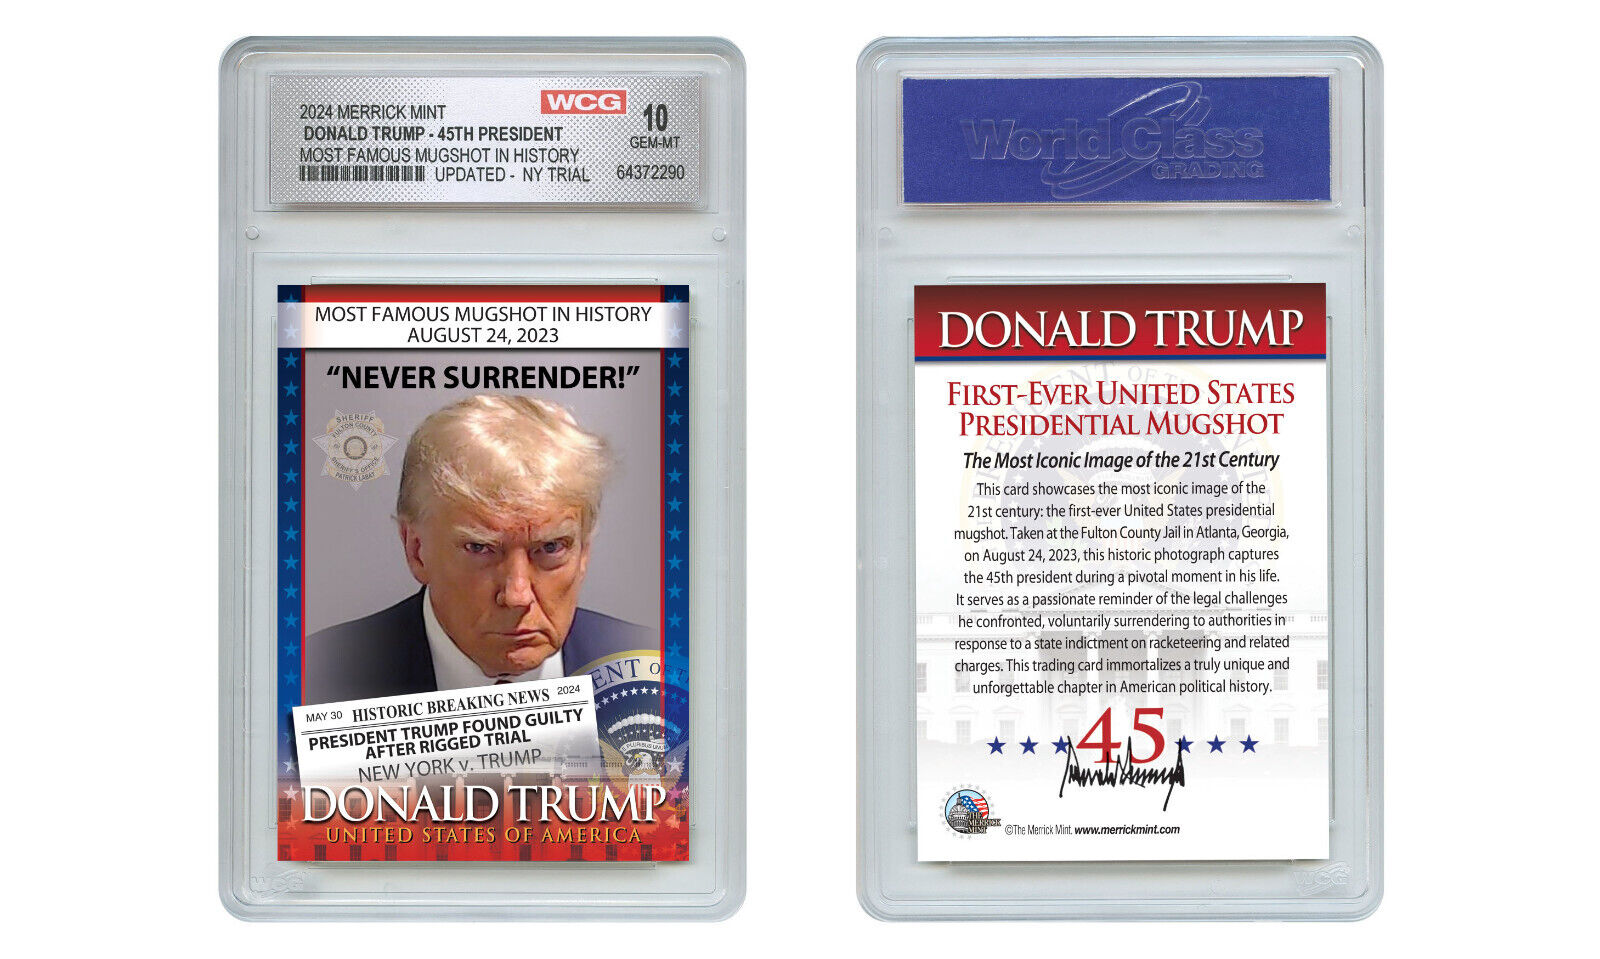 NY TRIAL UPDATED - DONALD TRUMP 45th President Official MUGSHOT Card GEM MINT 10